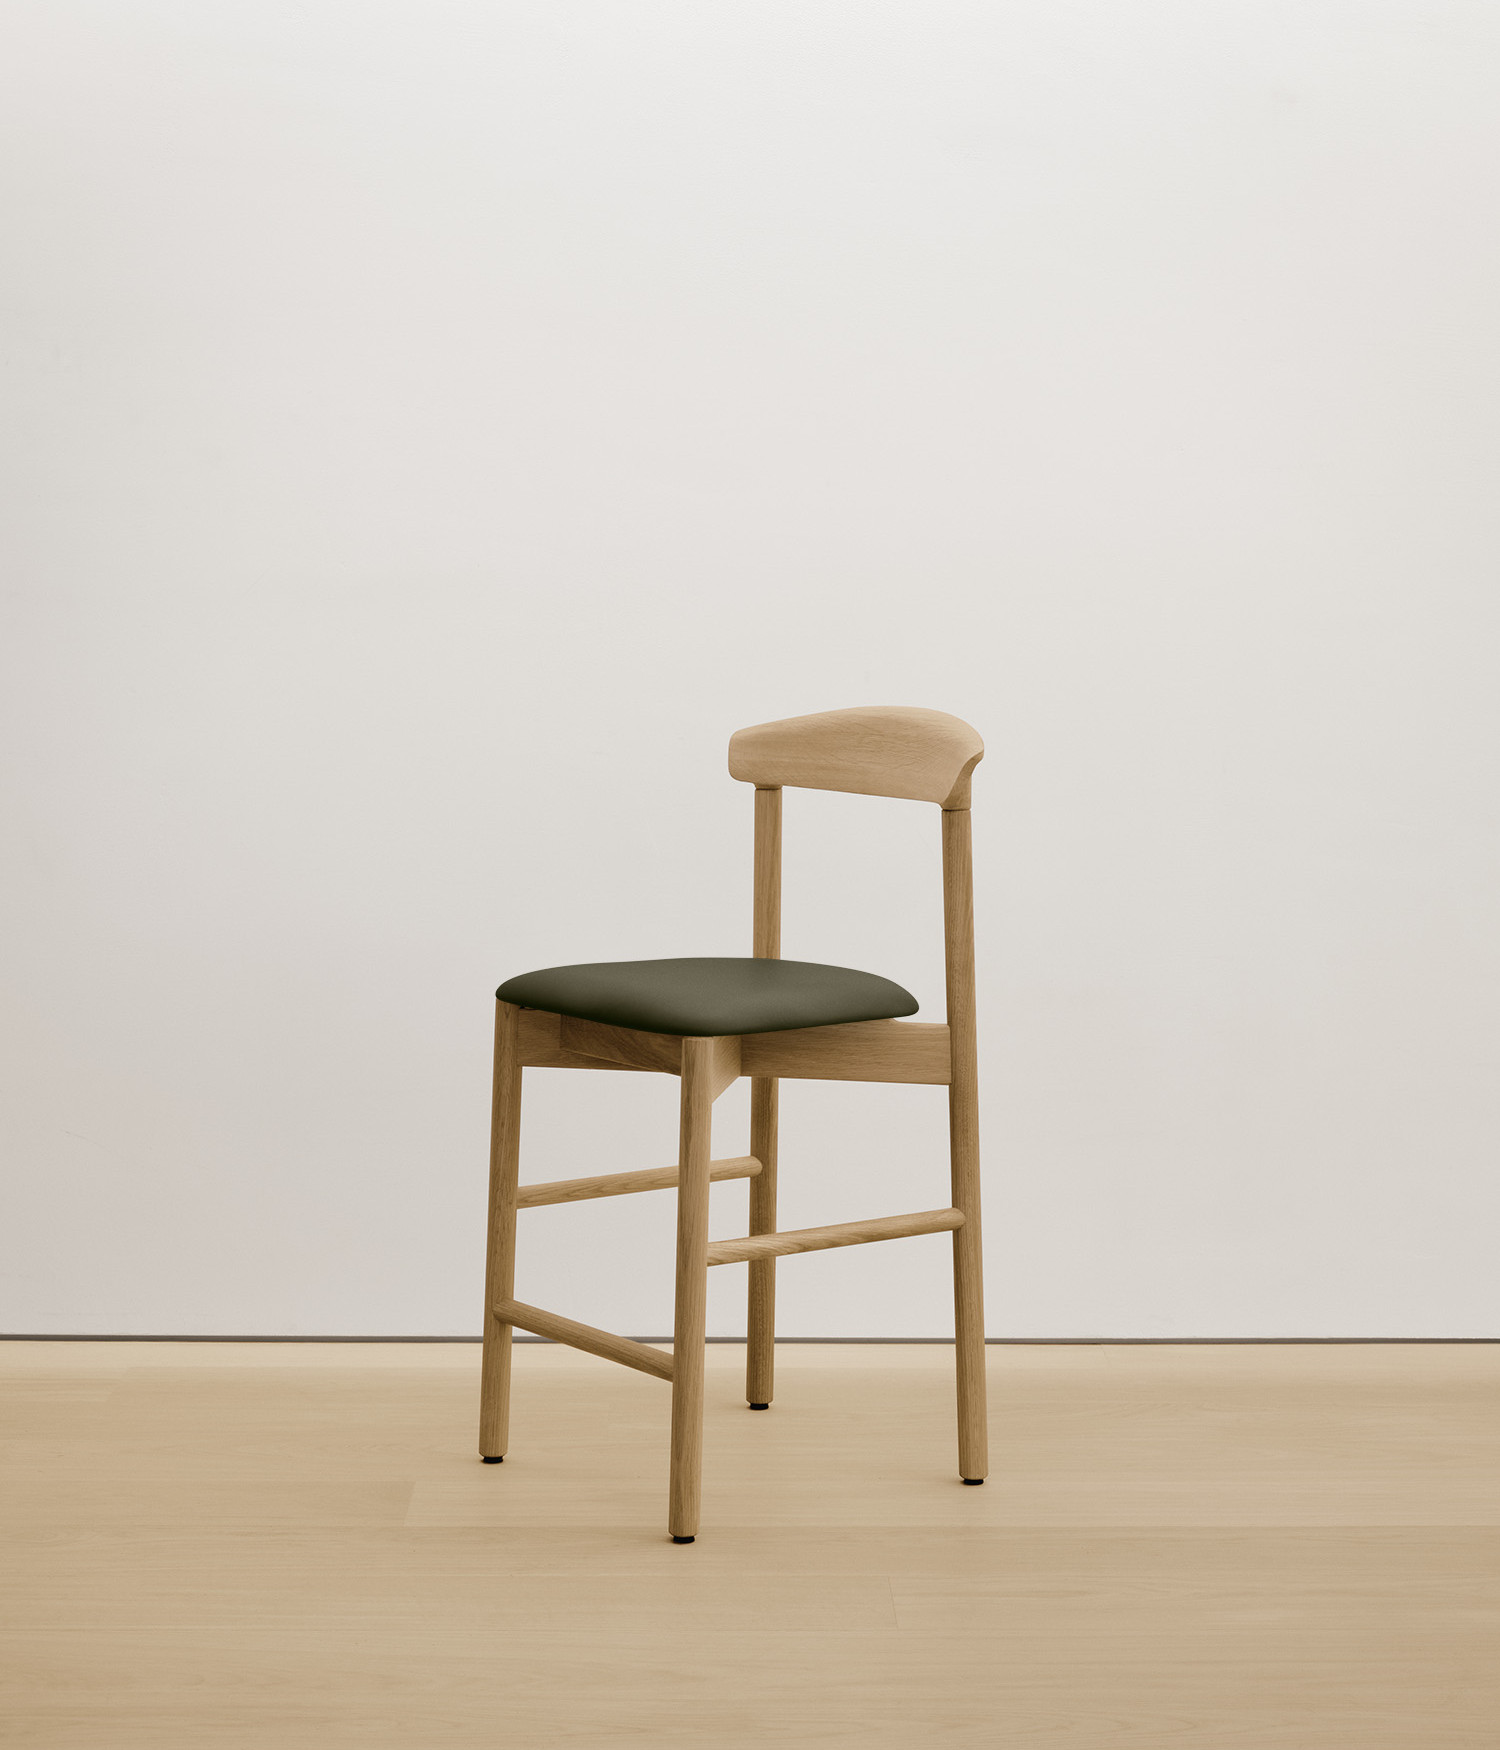  white-oak stool with forest color upholstered seat